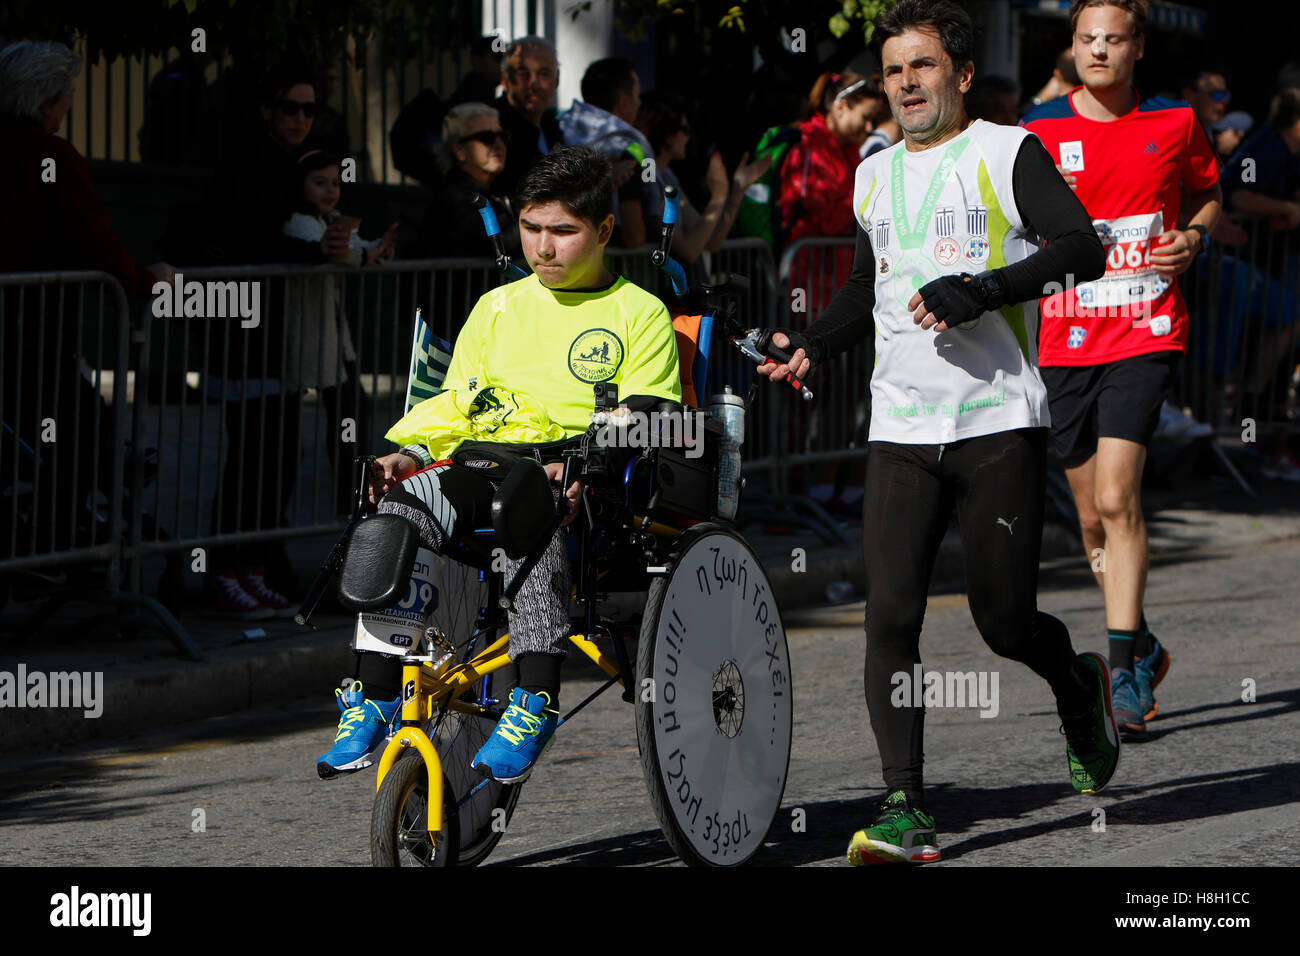 Athens, Greece. 13th November 2016. A runner pushes a boy in a wheel chair. Thousands of people from all over the world took part in the 2016 Athens Marathon the Authentic, which starts in the town of Marathon and is ending in Athens, the route, which according to legend was first run by the Greek messenger Pheidippides in 490 BC. Stock Photo